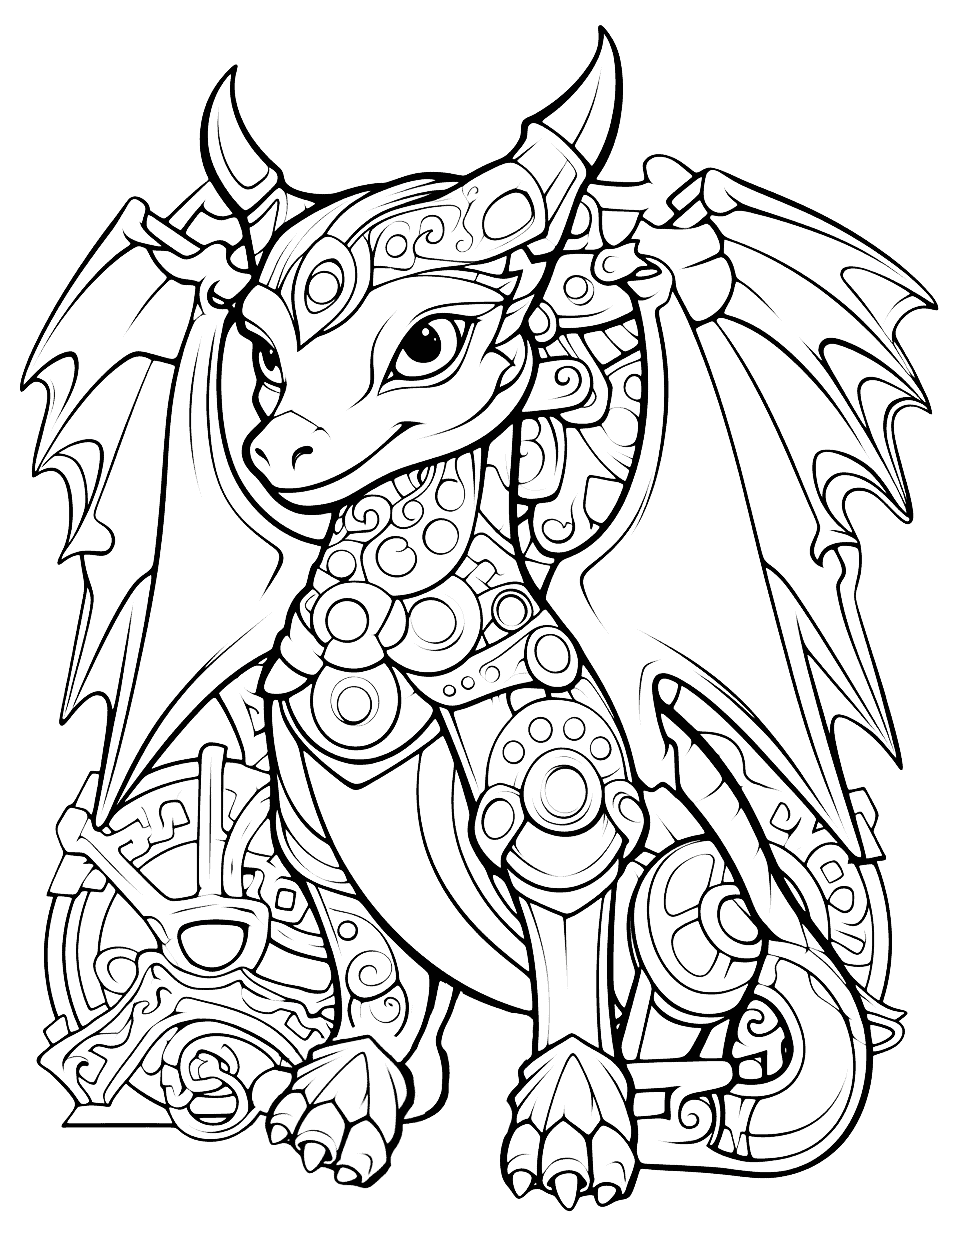 Steampunk Dragon's Lair Adult Coloring Page - A detailed scene of a steampunk dragon in its lair.